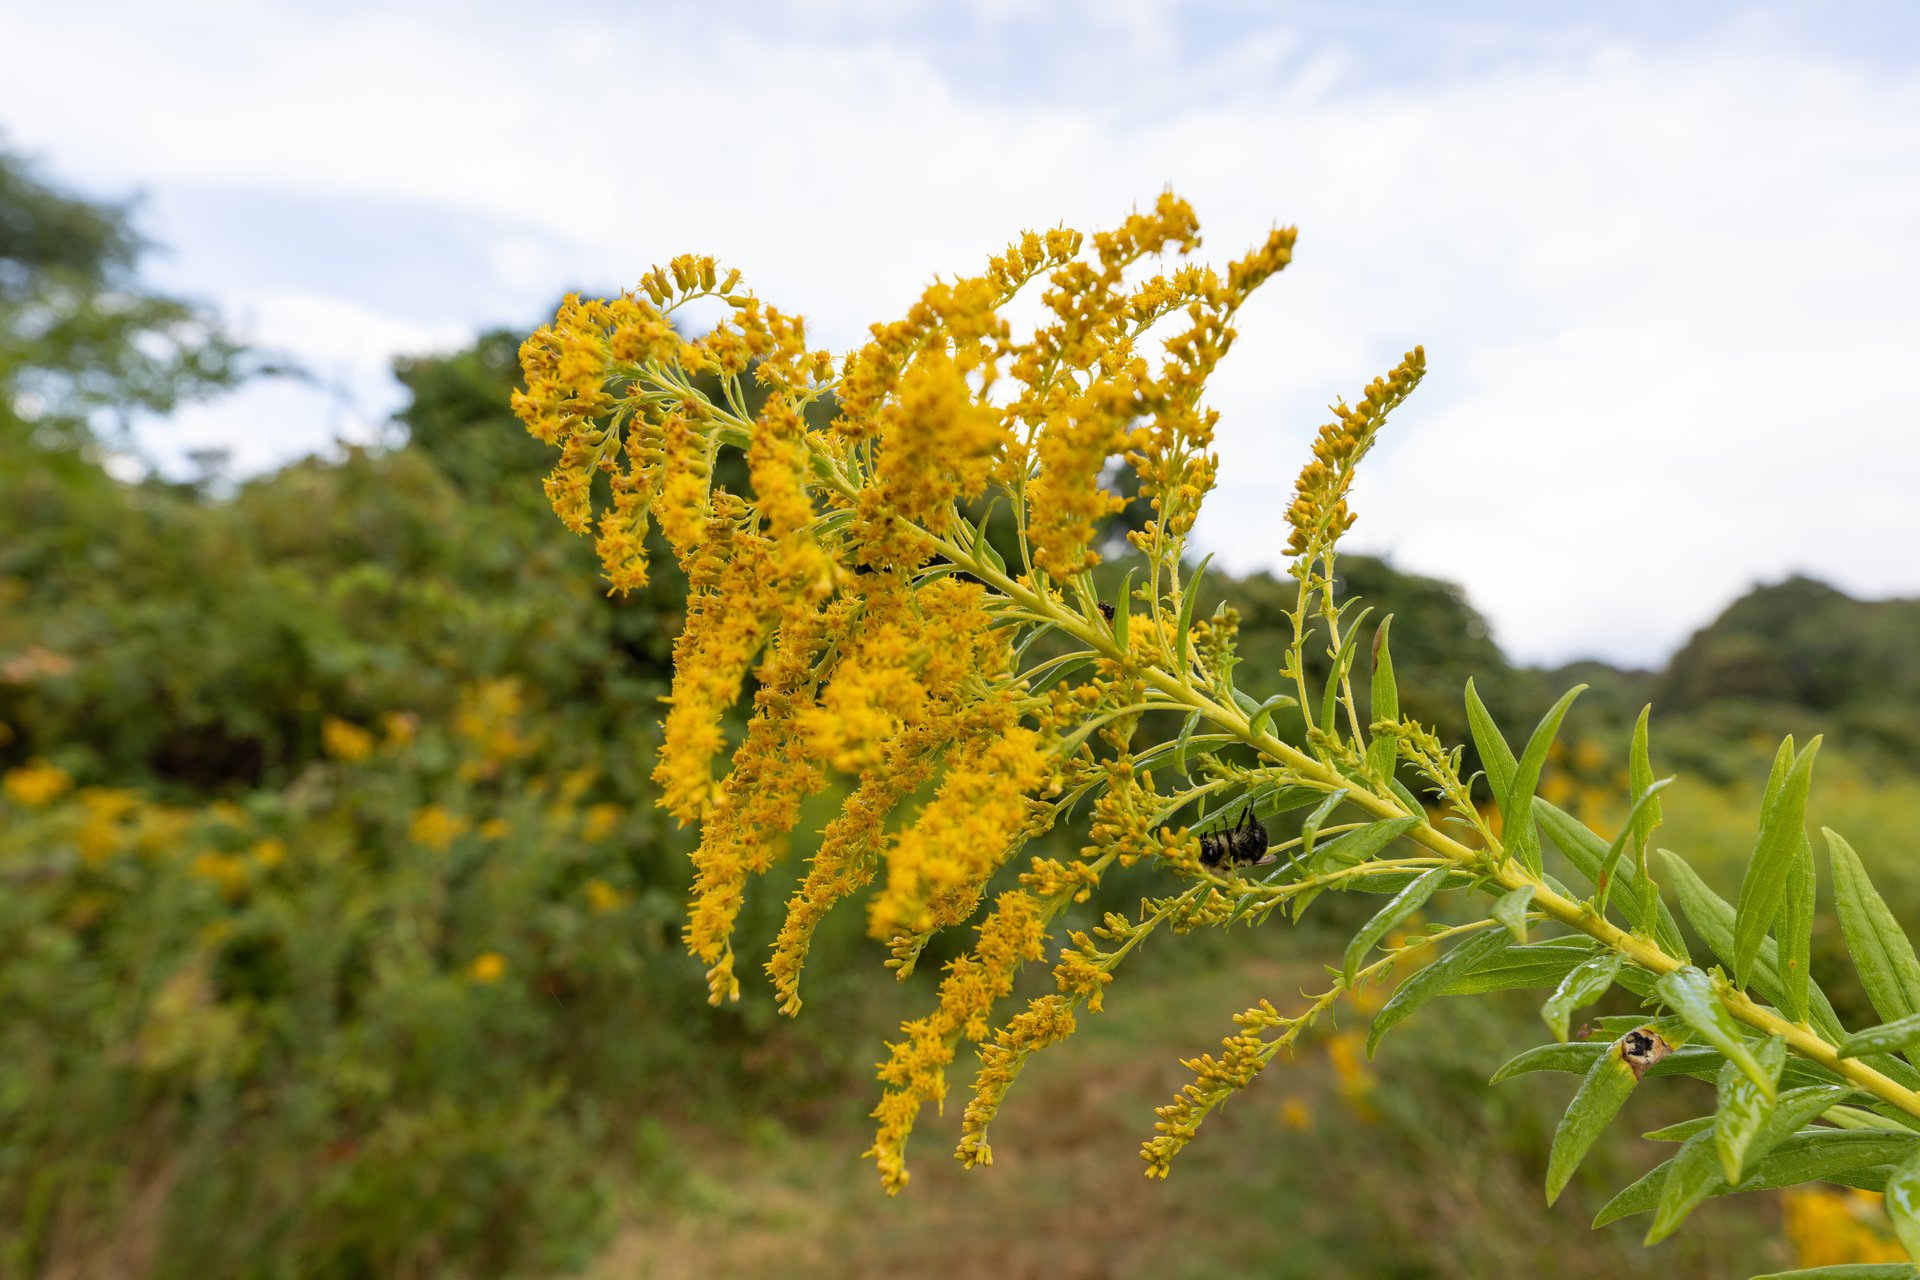 Yellow plant, the goldenrod